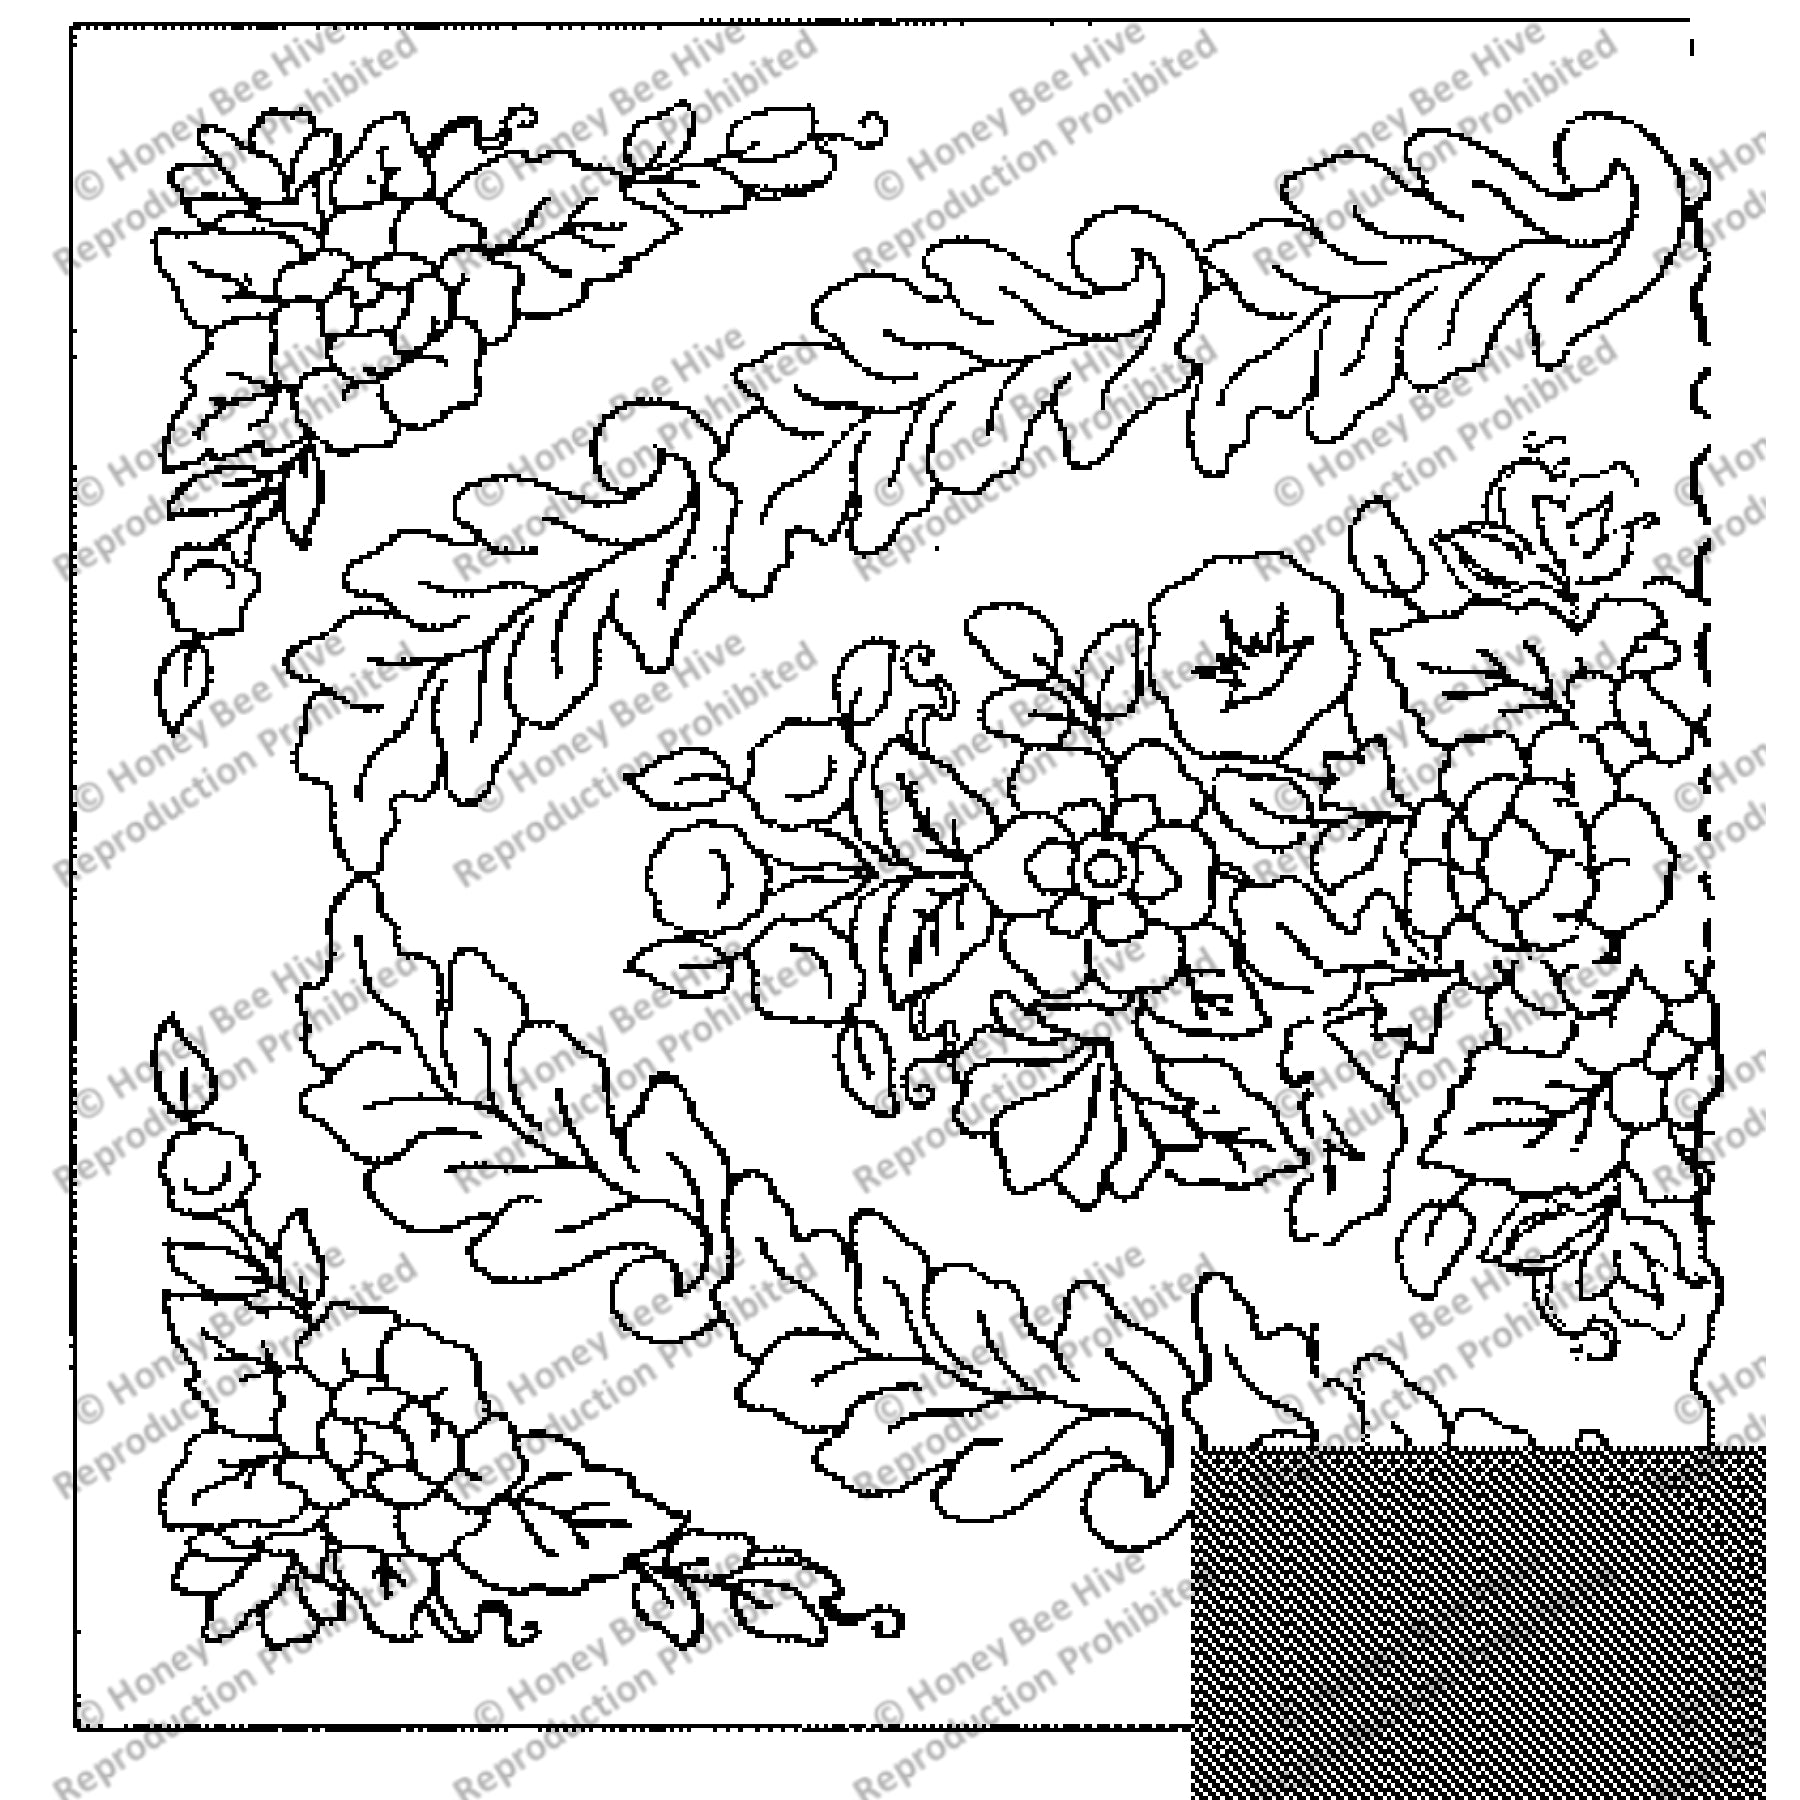 Newhall Legacy, rug hooking pattern